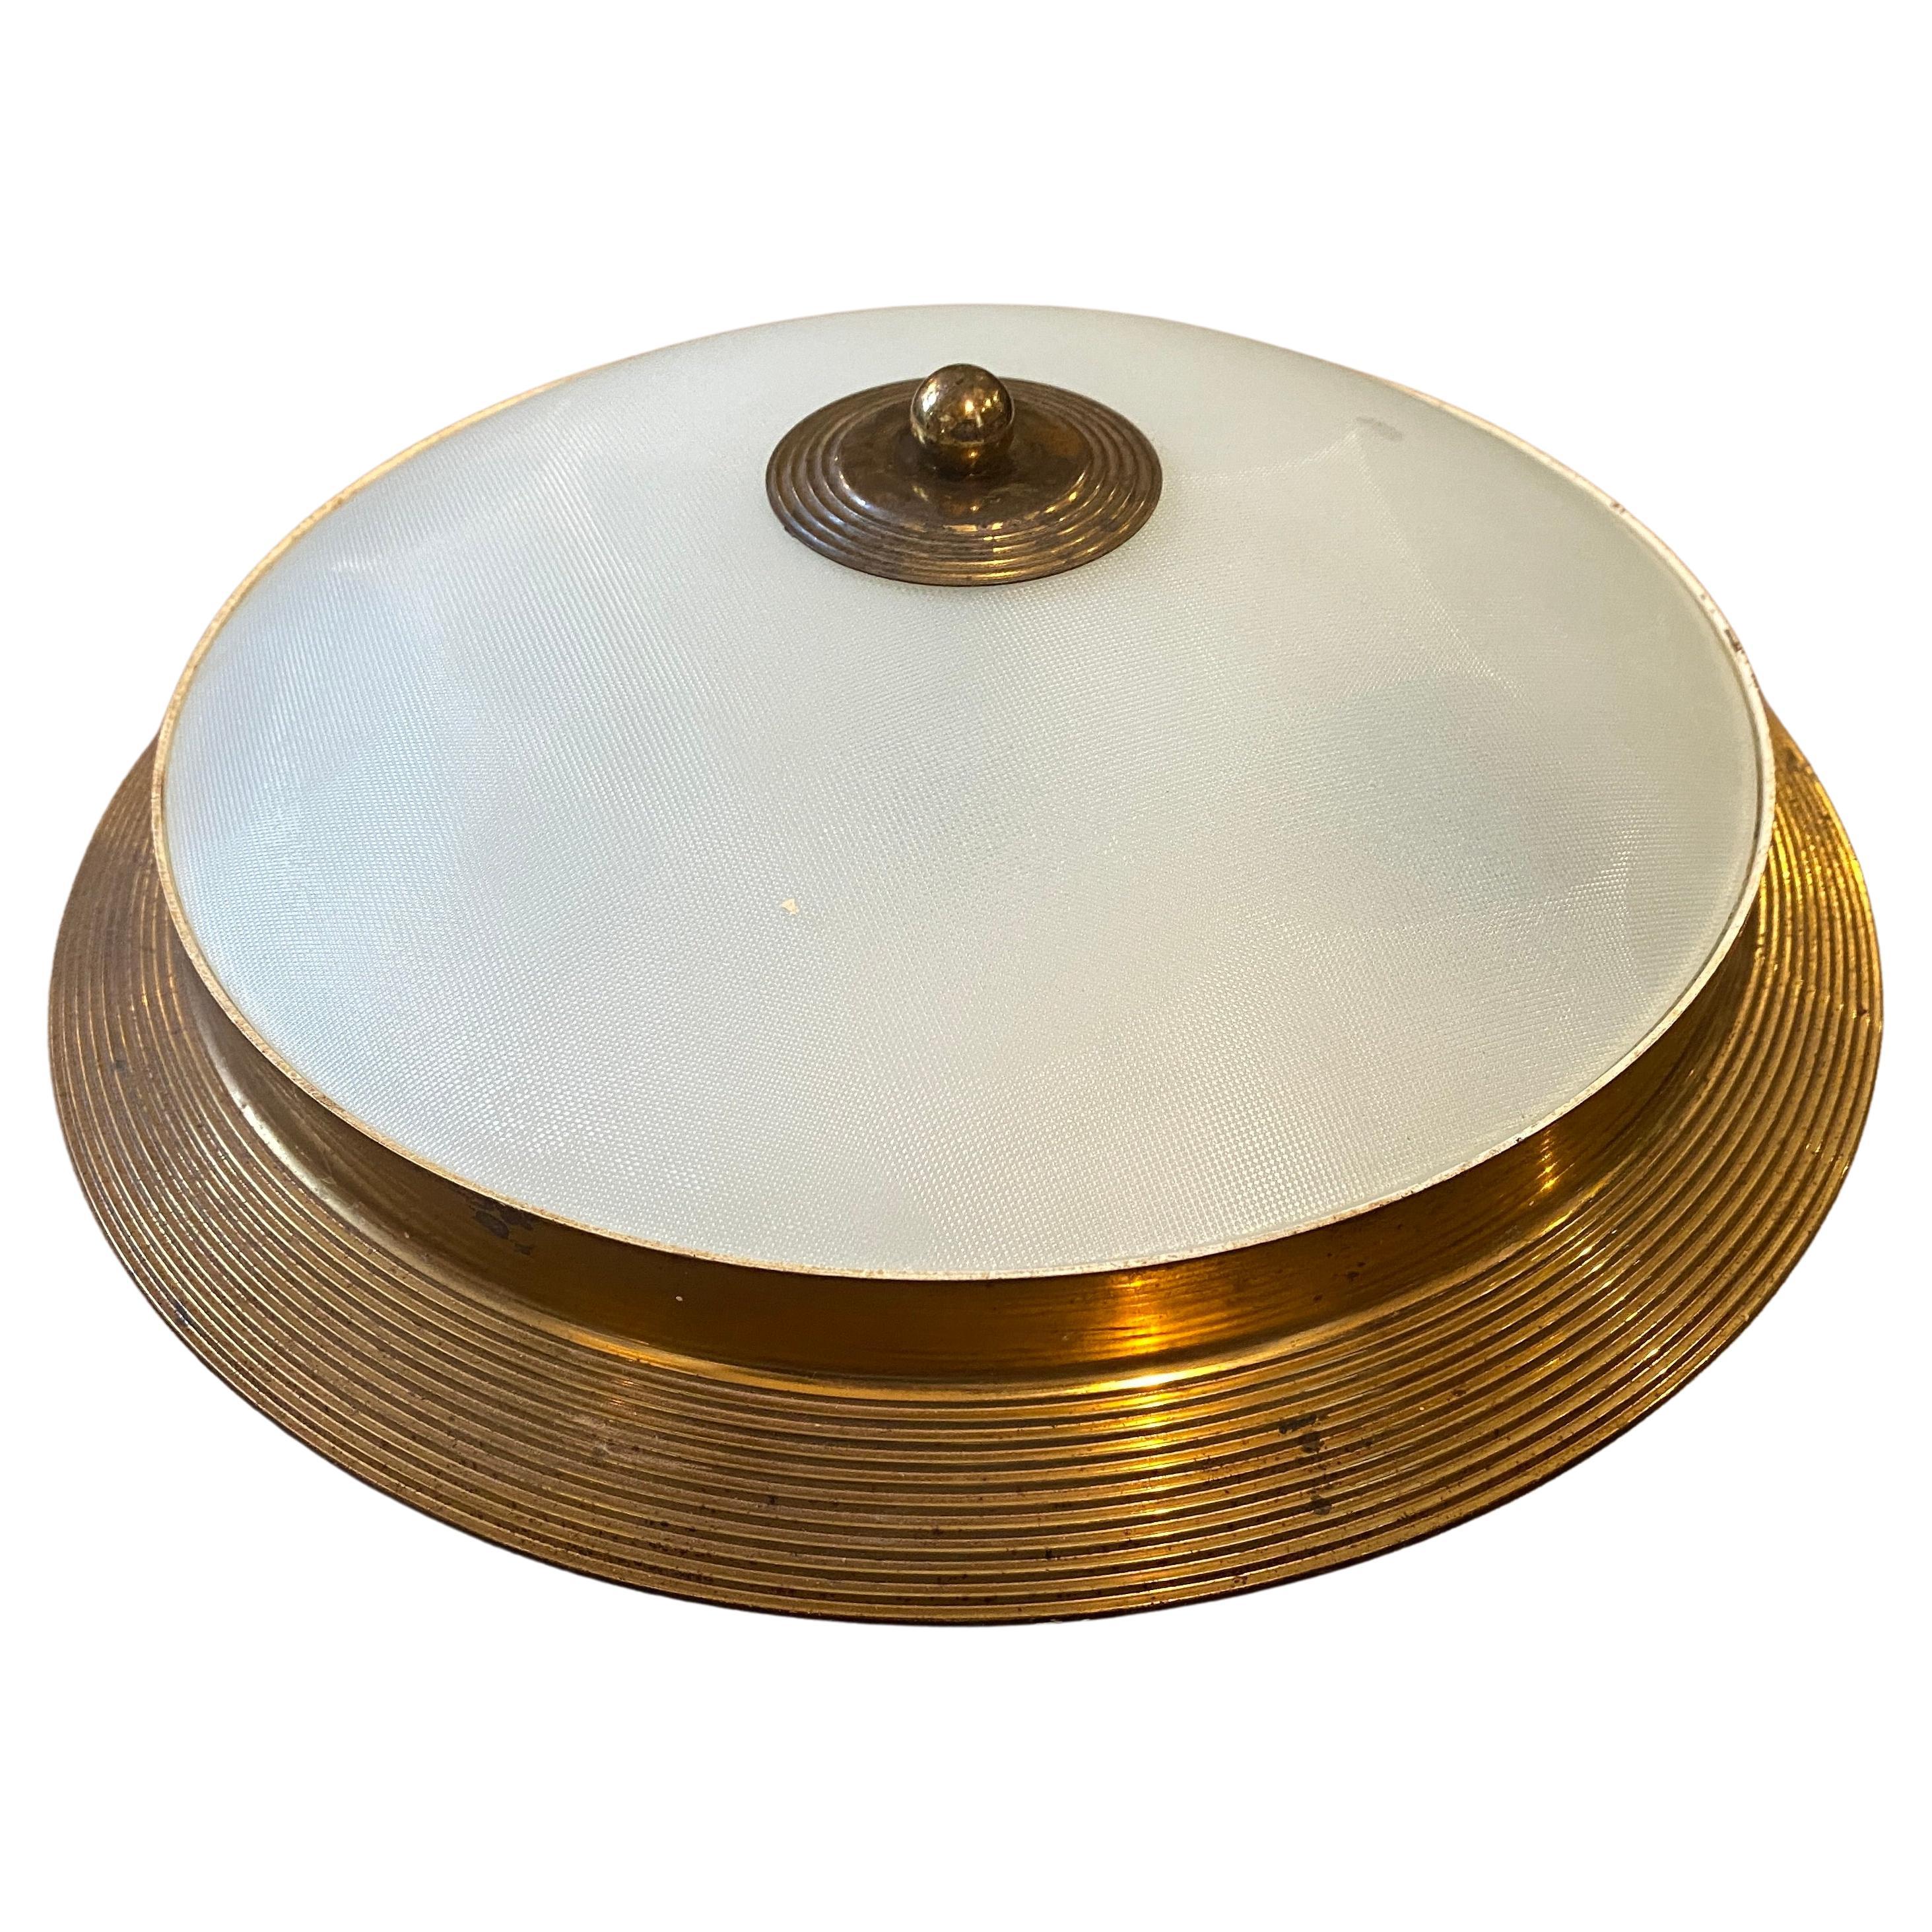 High quality, style and type of glass of this ceiling light gives to it a Fontana Arte attribution. Brass it's in original patina, the knurled glass it's in perfect conditions. It works 110-240 Volts and needs regular e14 bulbs.